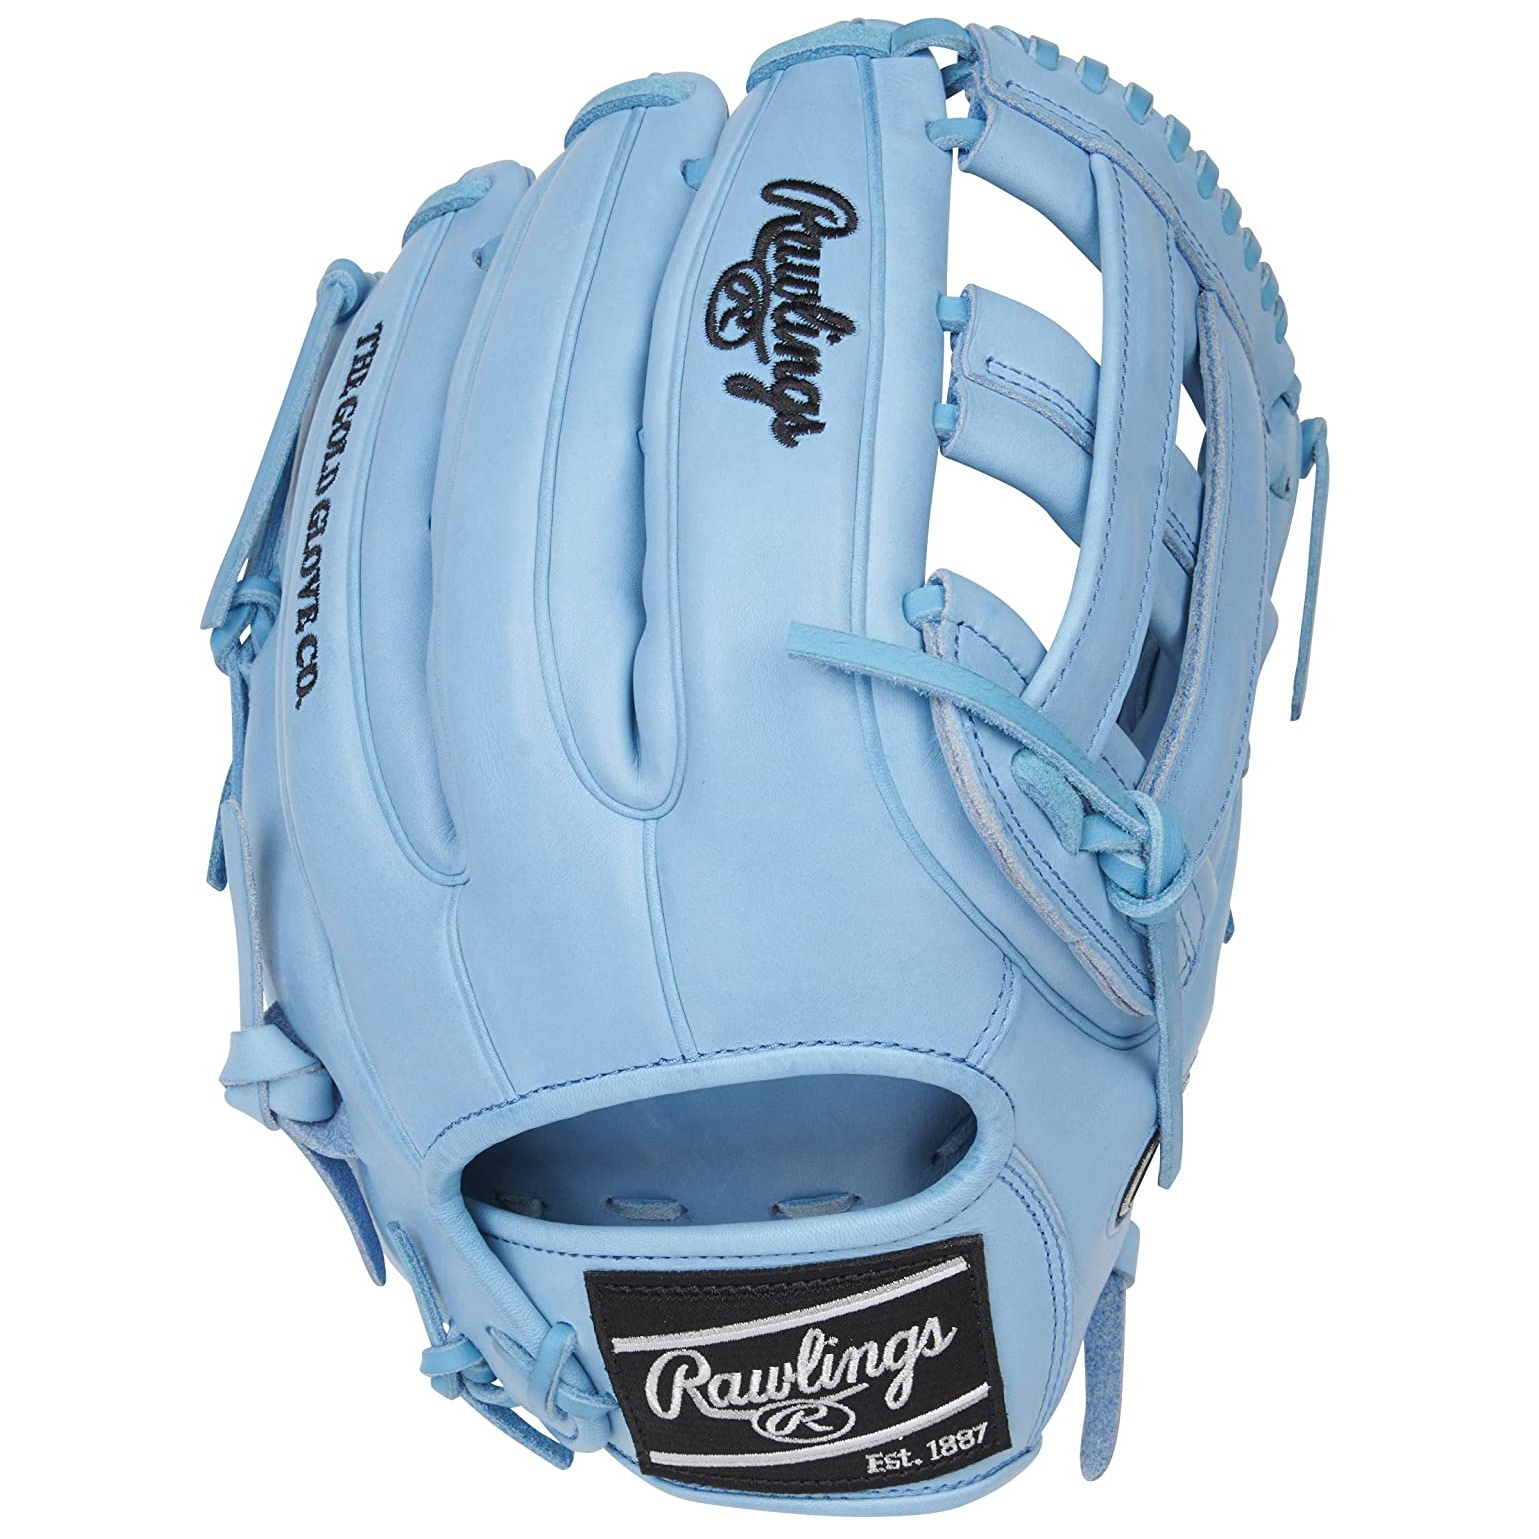 rawlings-heart-of-the-hide-12-75-inch-baseball-glove-pro-h-web-narrow-fit-right-hand-throw PROR3319-6CB-RightHandThrow Rawlings  Get your hands on the ultimate baseball glove with Rawlings Heart